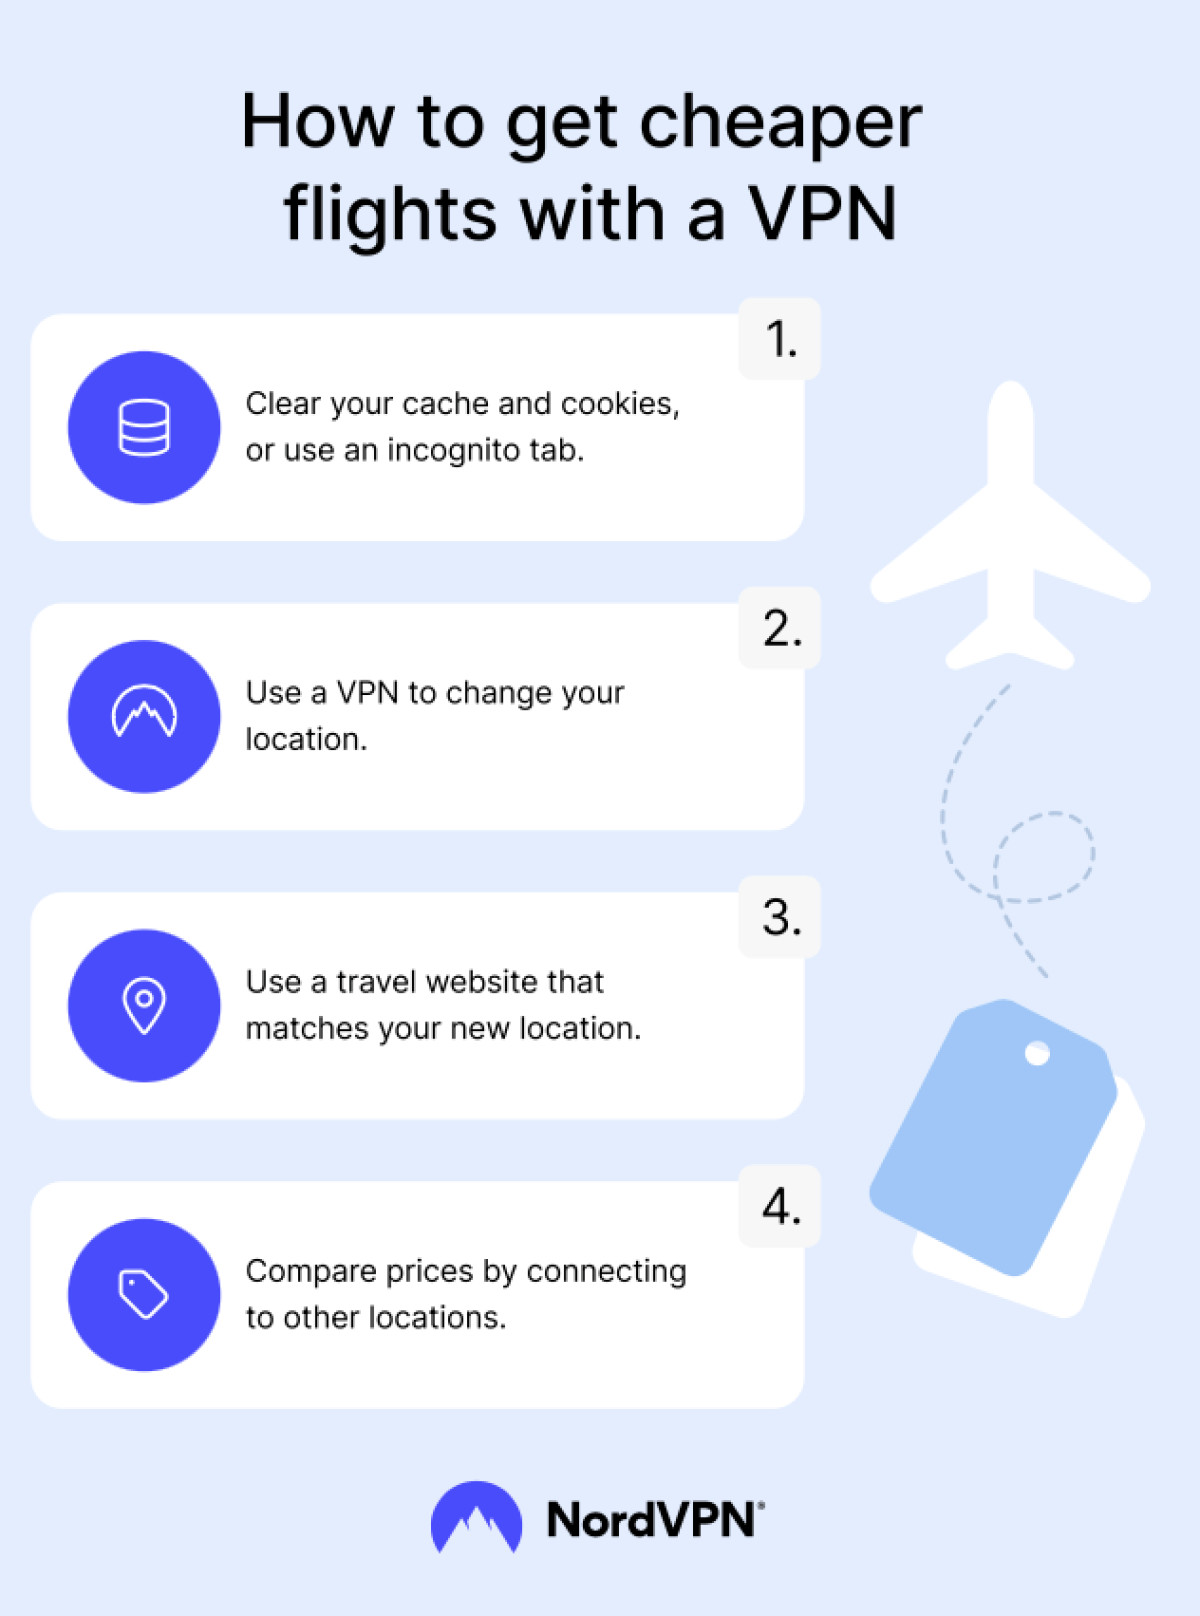 How to get cheaper flights using a vpn